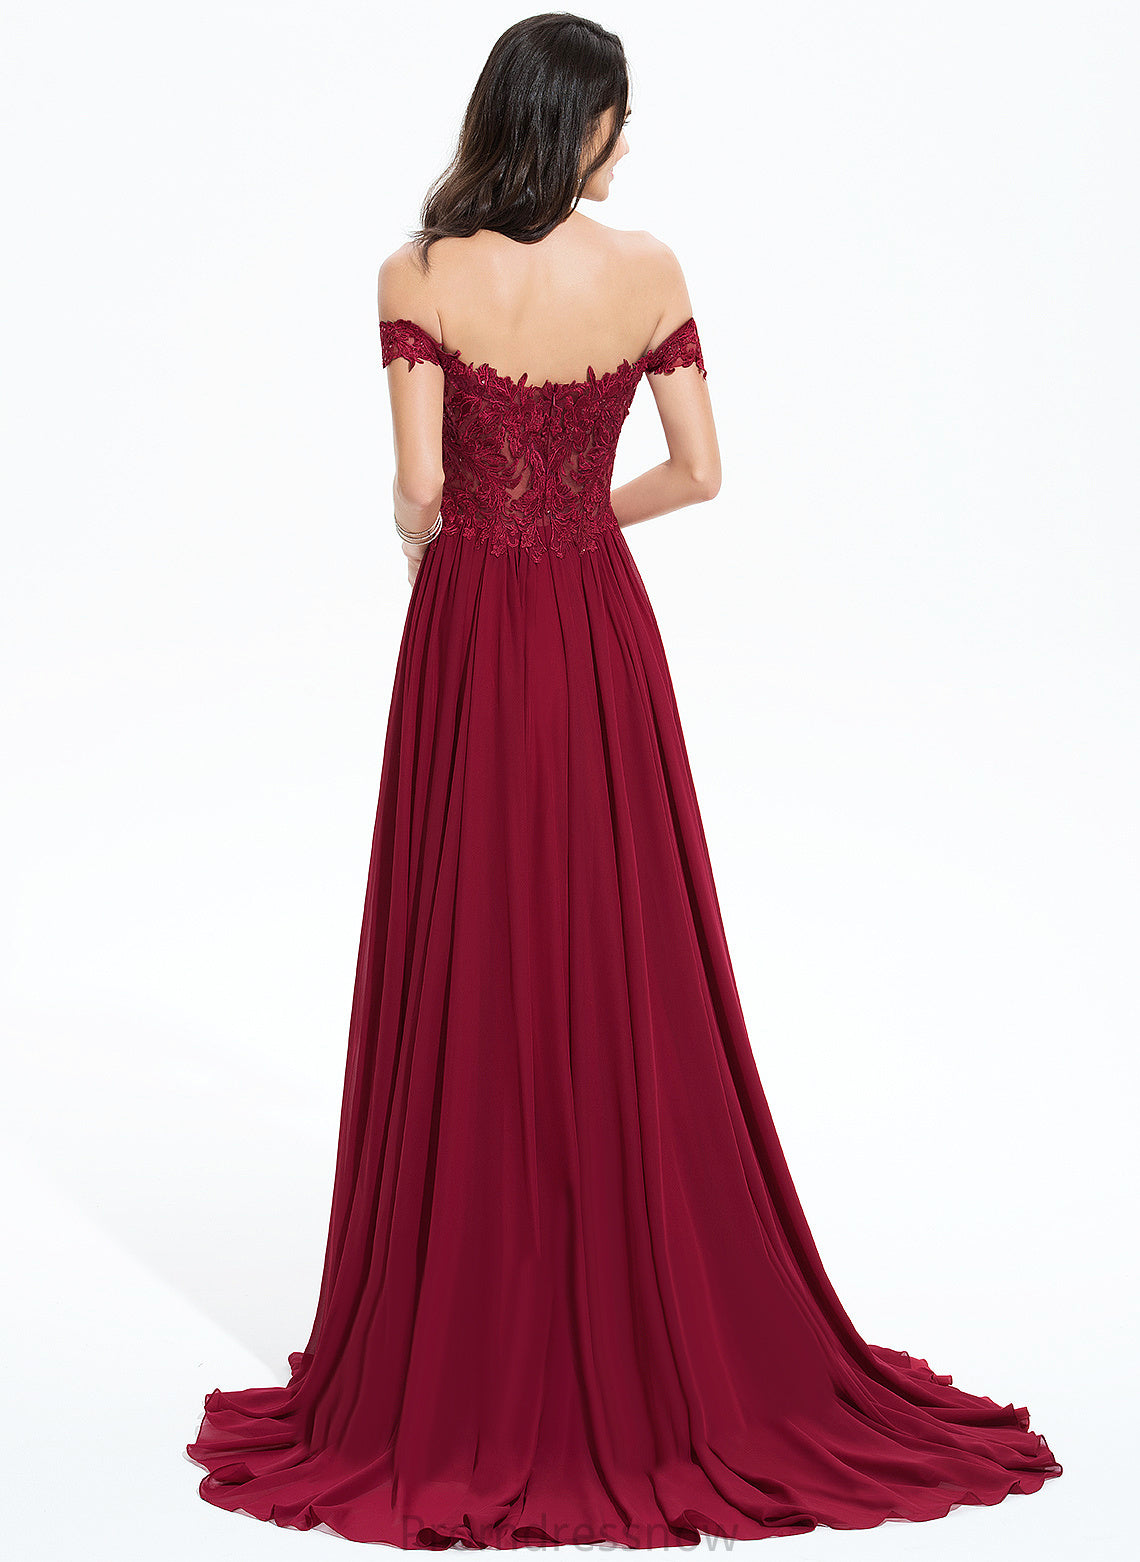 Natalie A-Line Prom Dresses Off-the-Shoulder Lace Sweep Sequins Chiffon Train With